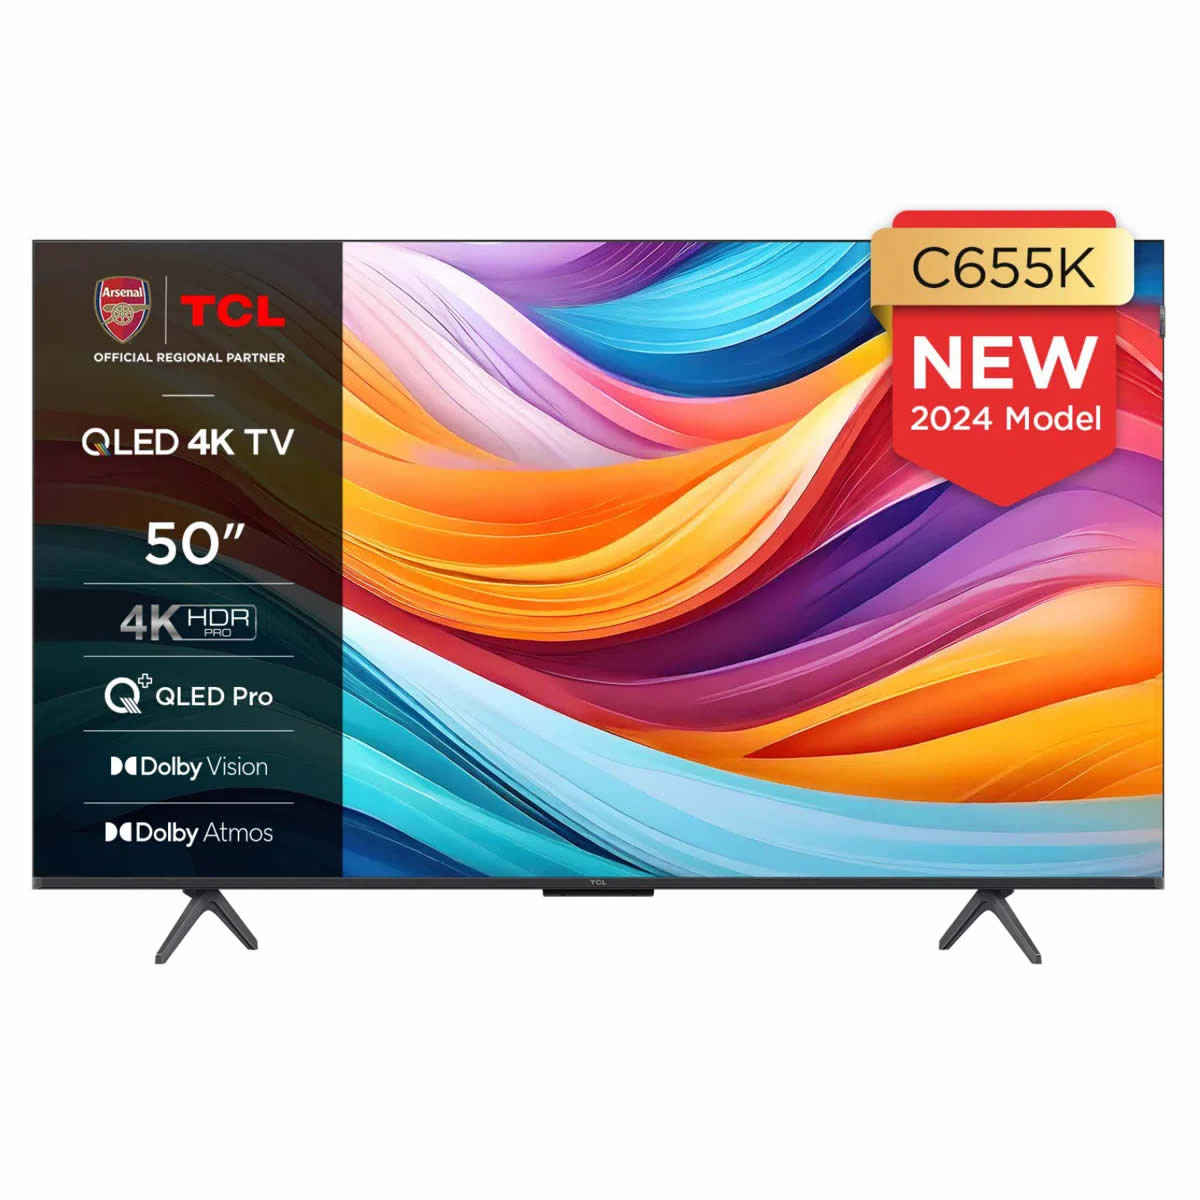 TCL 50inch 4K QLED PRO SMART TV WiFi Freeview HD Google